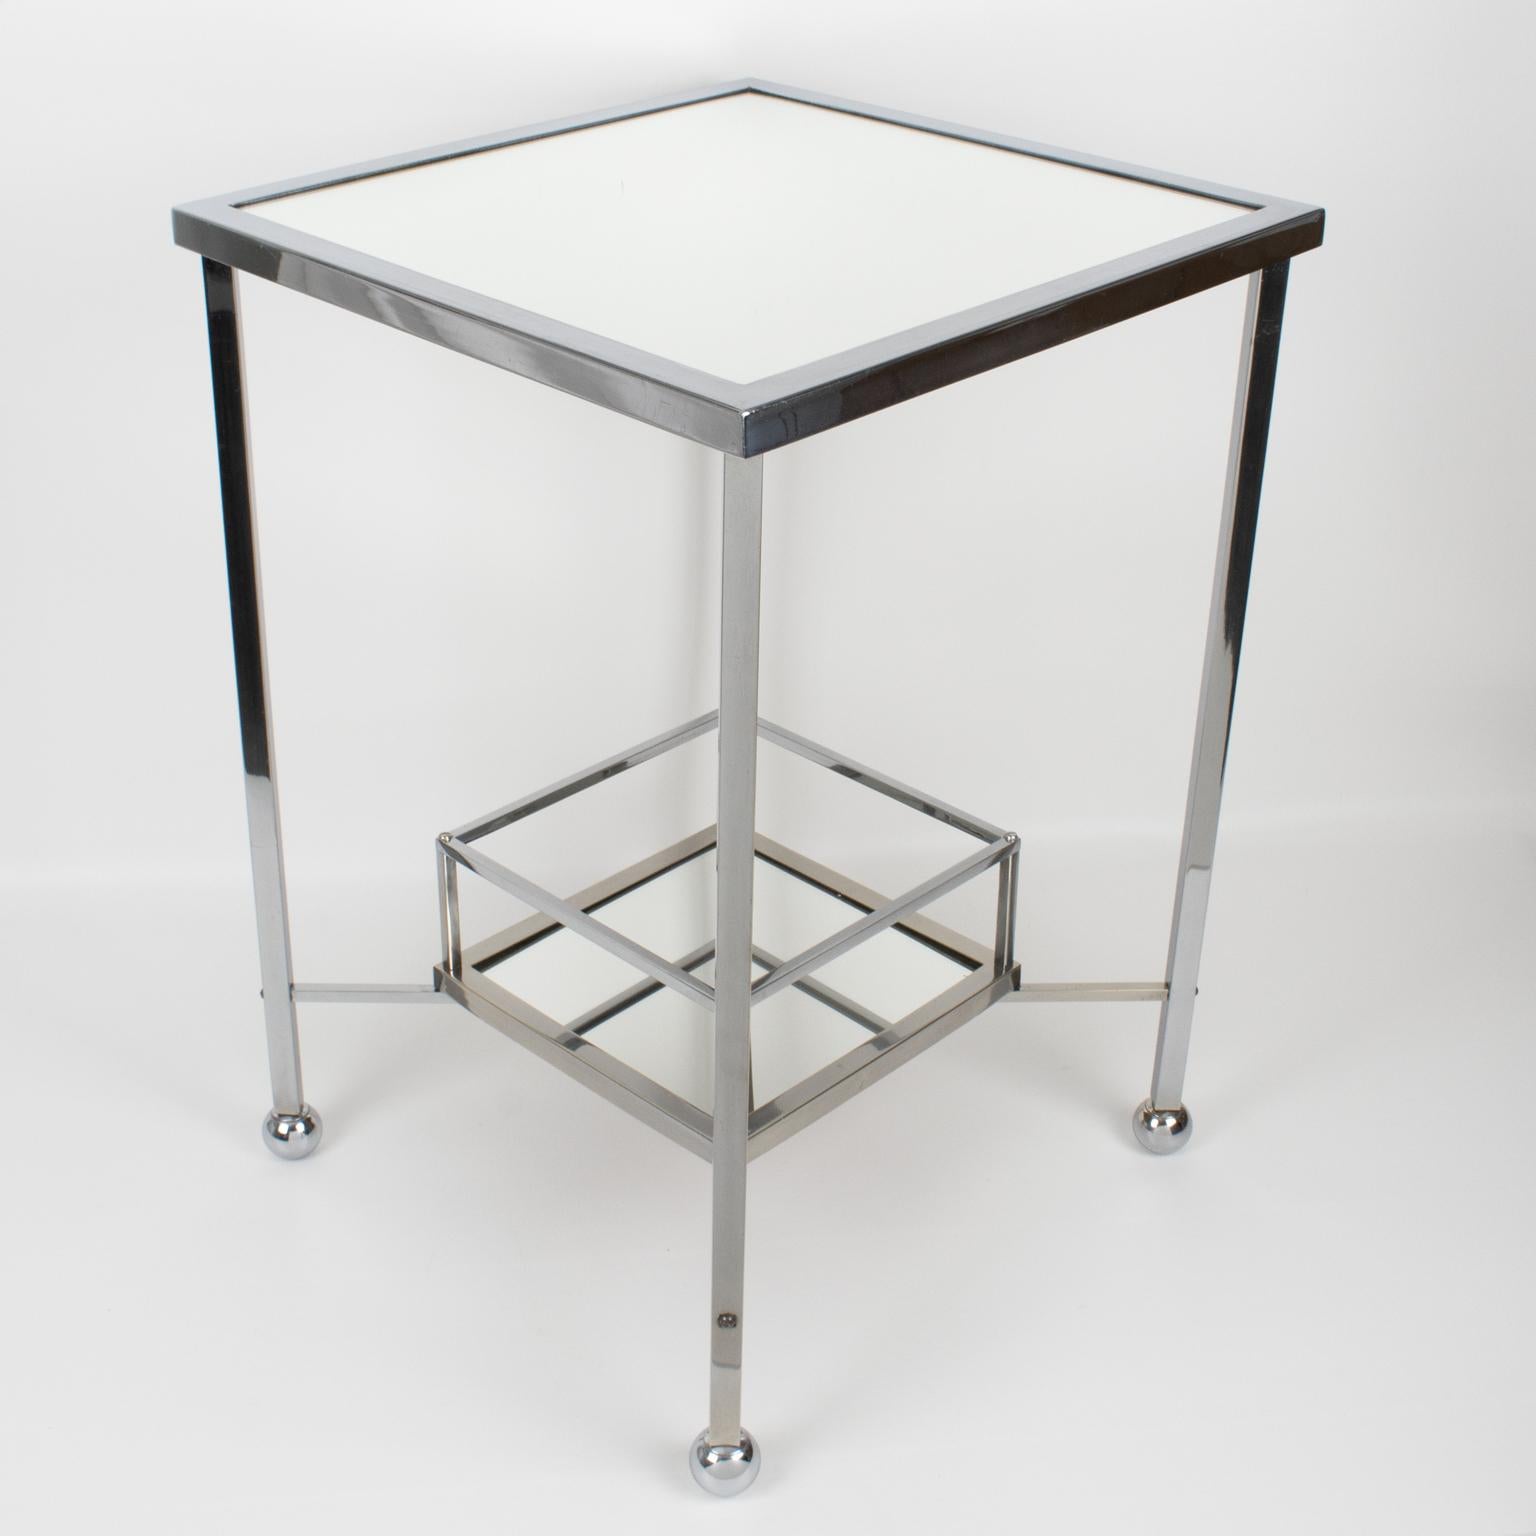 French Jacques Adnet Art Deco Chrome and Mirror Side Bar Table, France 1930s For Sale